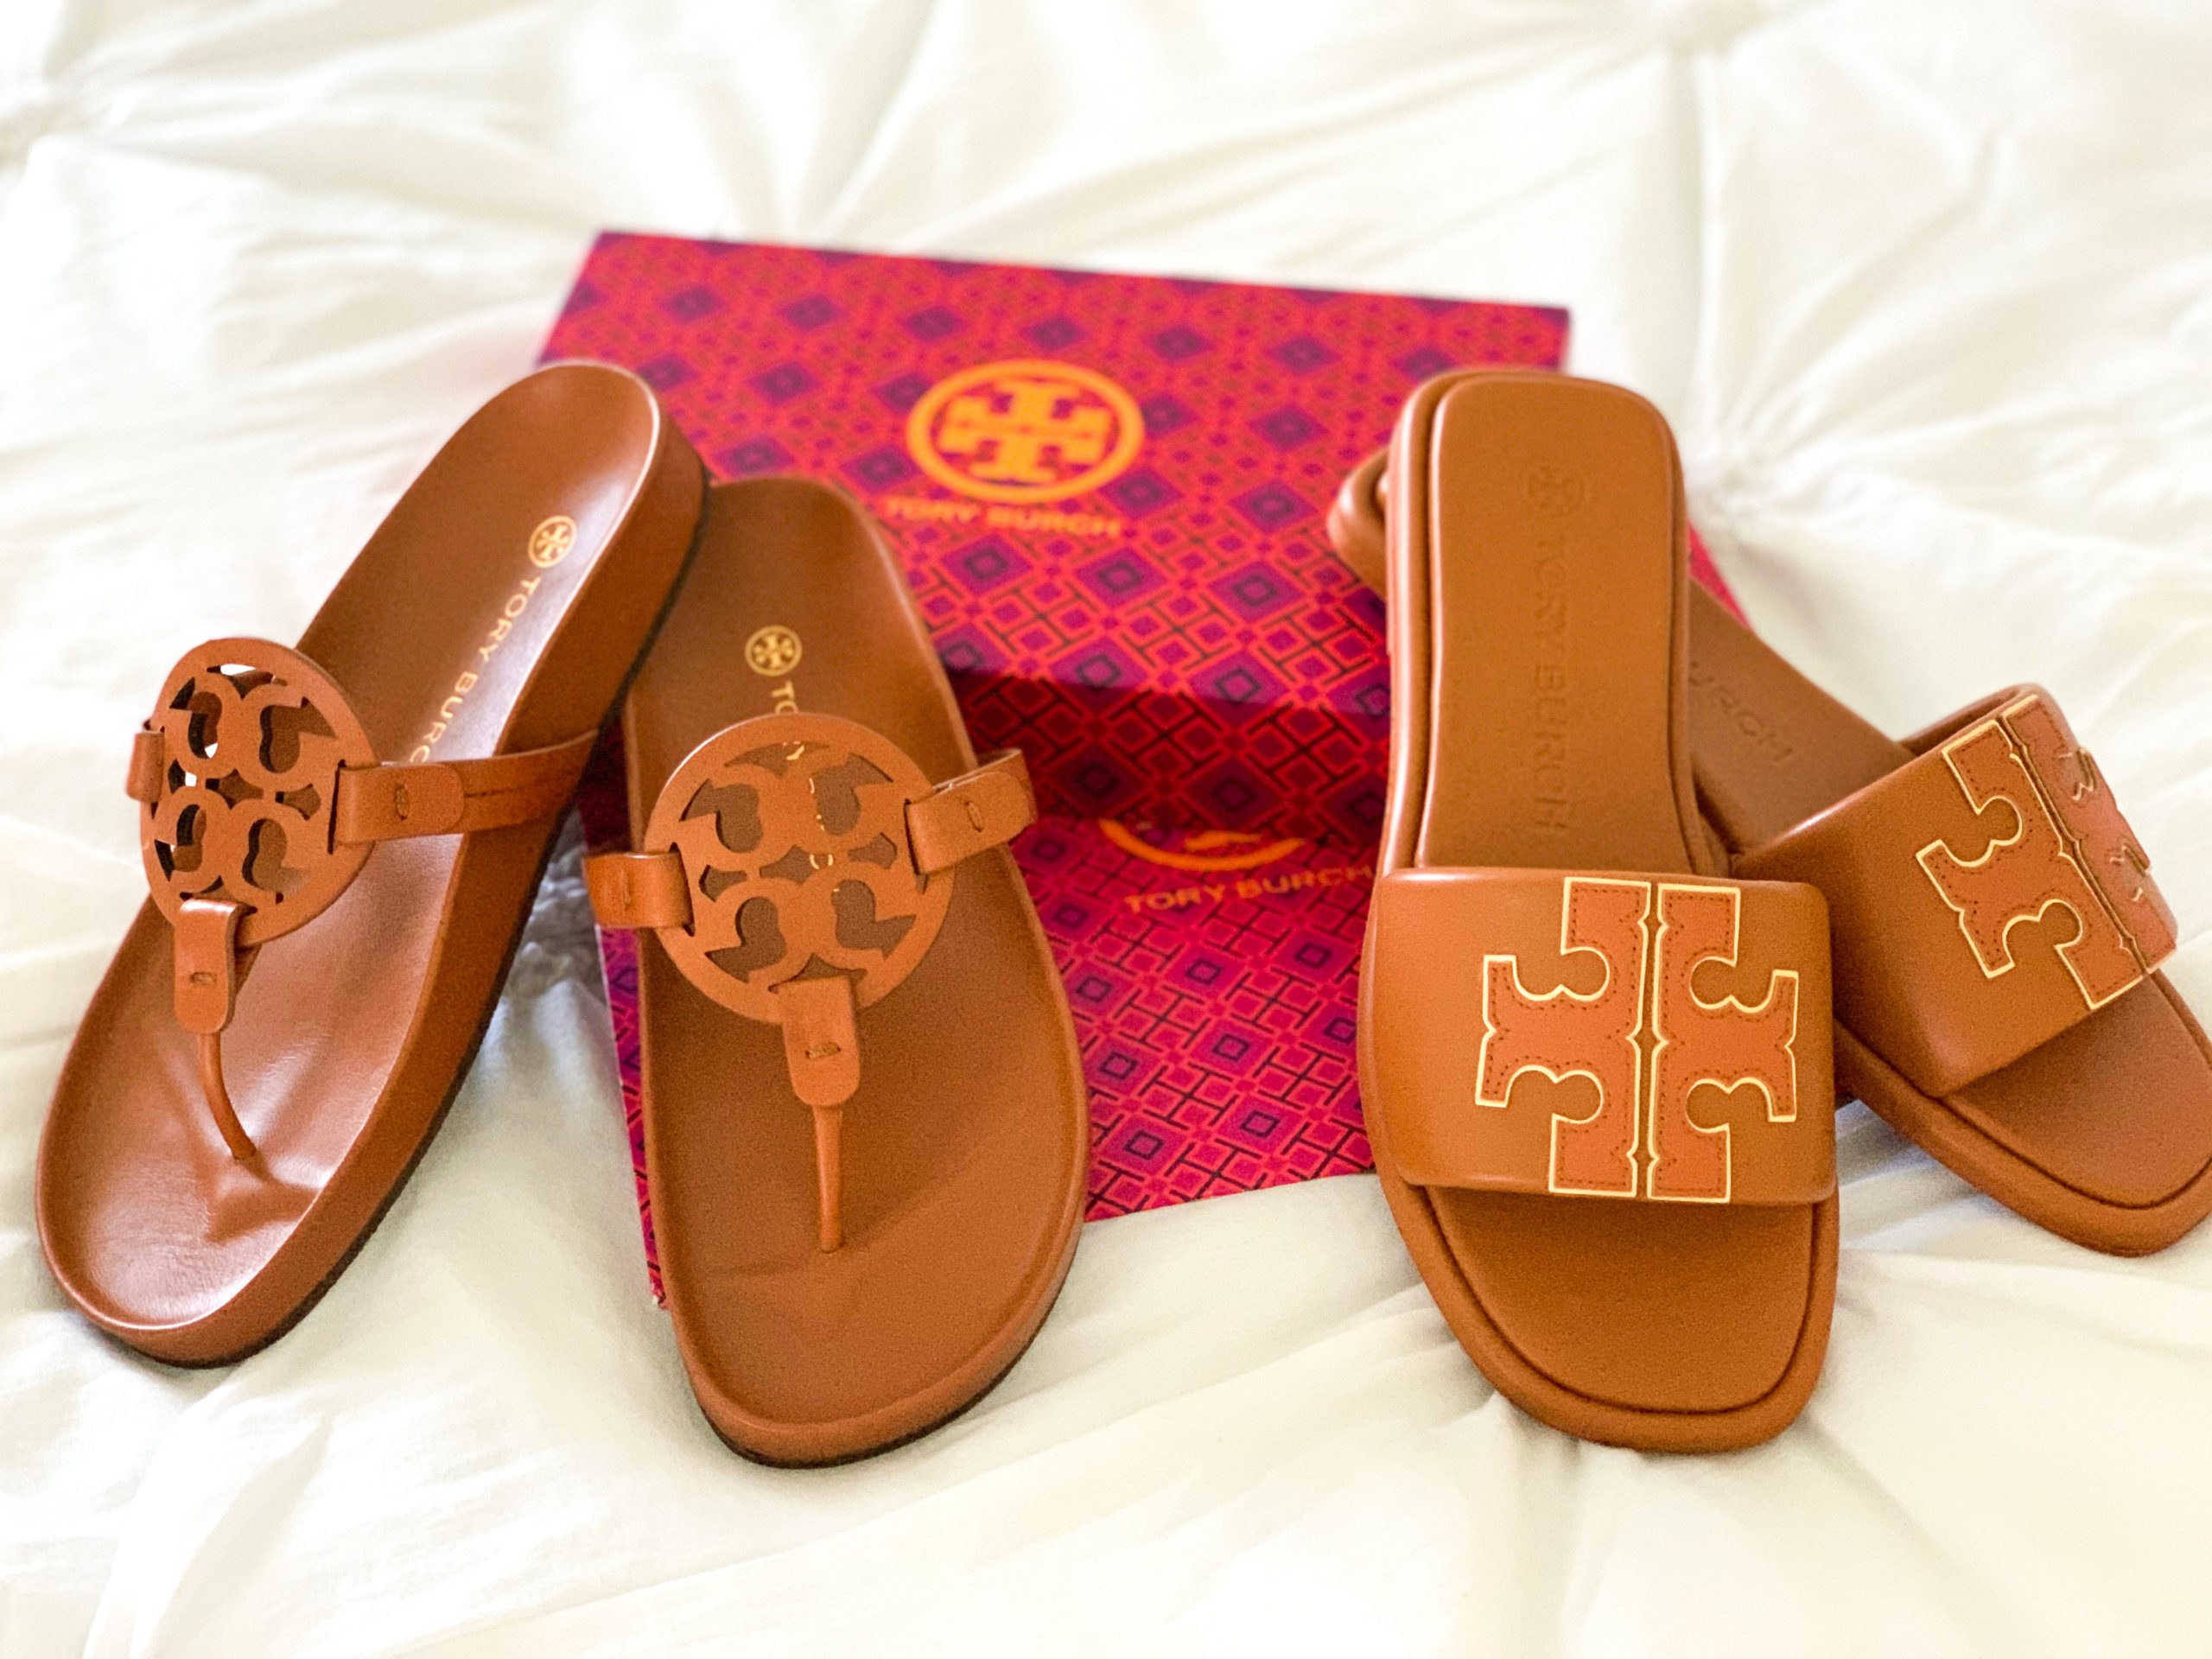 Are Tory Burch Miller Sandals Still in Style?